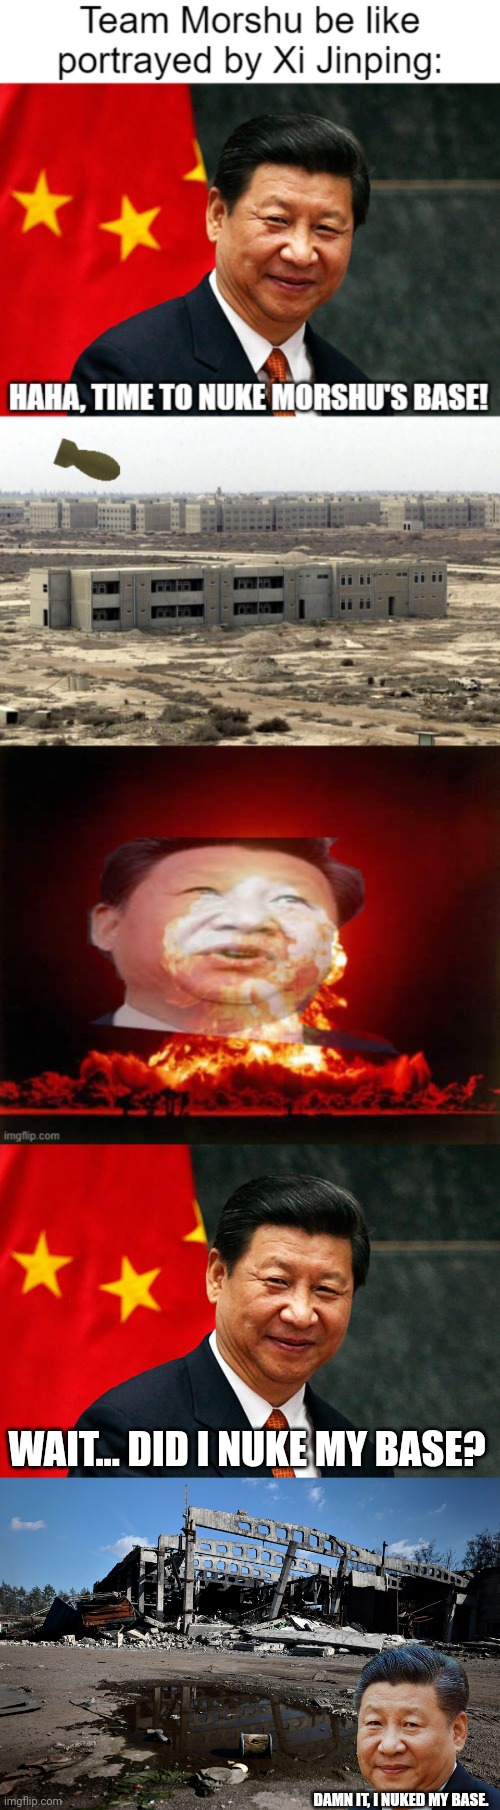 Xi Jinping being an idiot for nuking his own base | WAIT... DID I NUKE MY BASE? DAMN IT, I NUKED MY BASE. | made w/ Imgflip meme maker